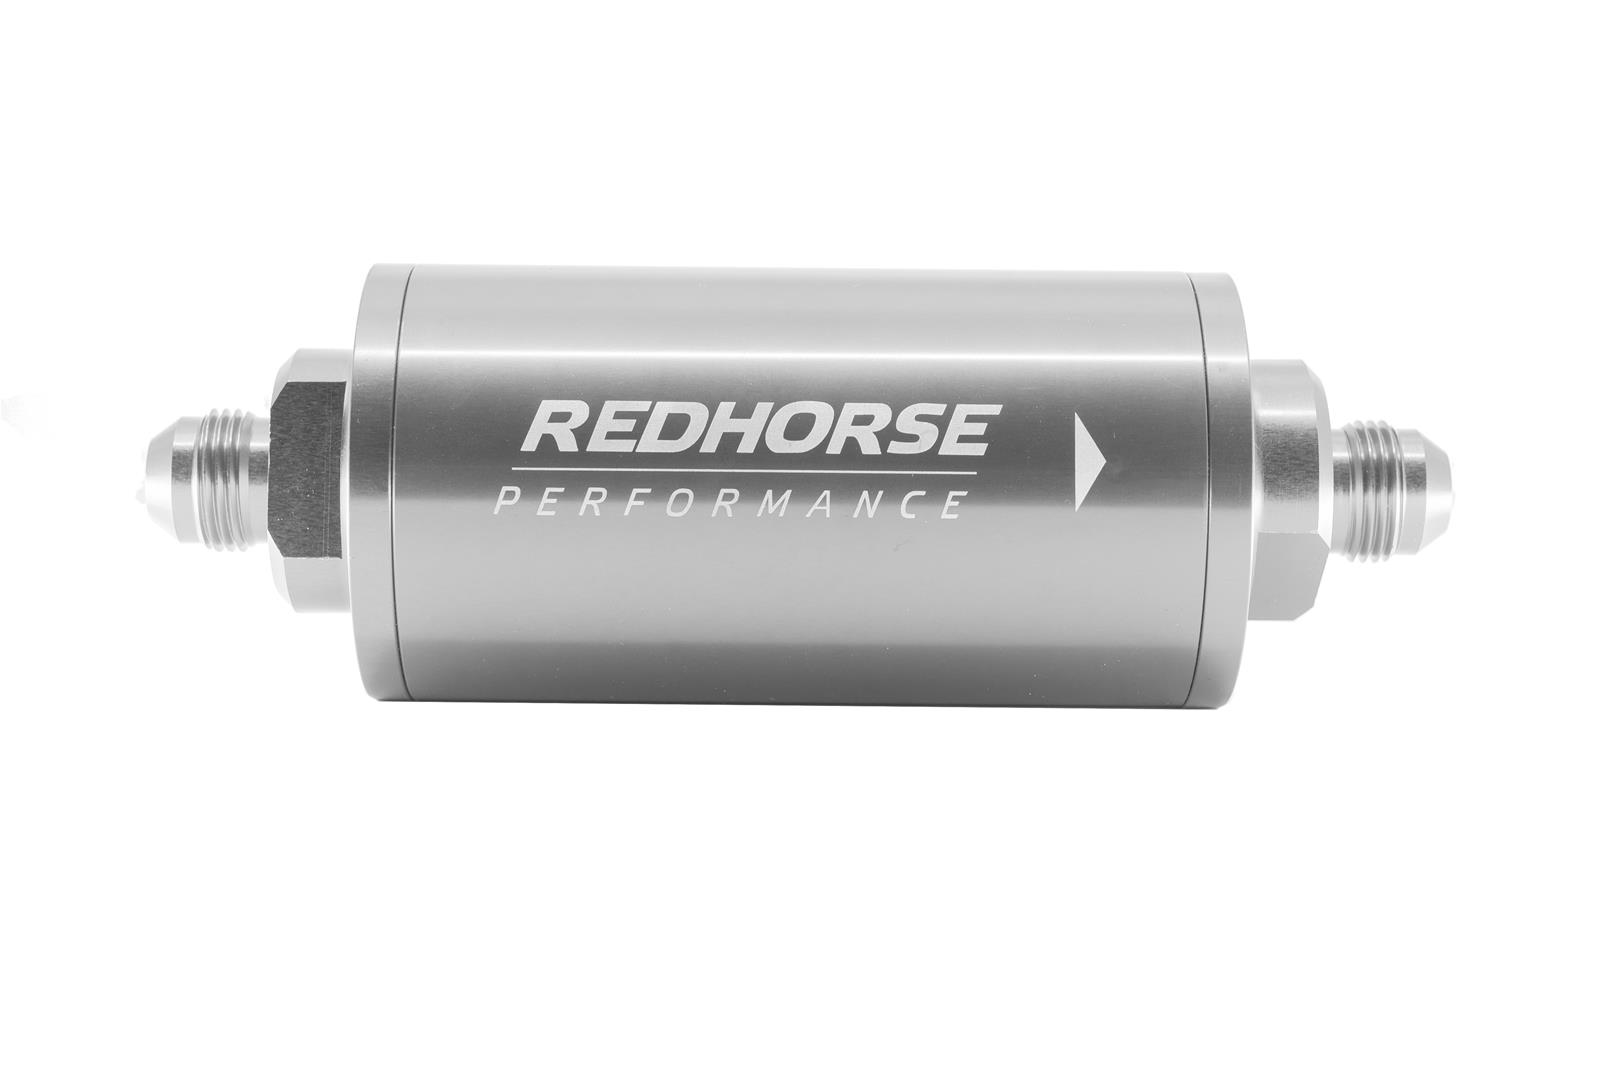 Redhorse Performance 4651-06-5-10 6in Cylindrical In-Line Race Fuel Filter w/ 10 Micron S.S. element - 06 AN